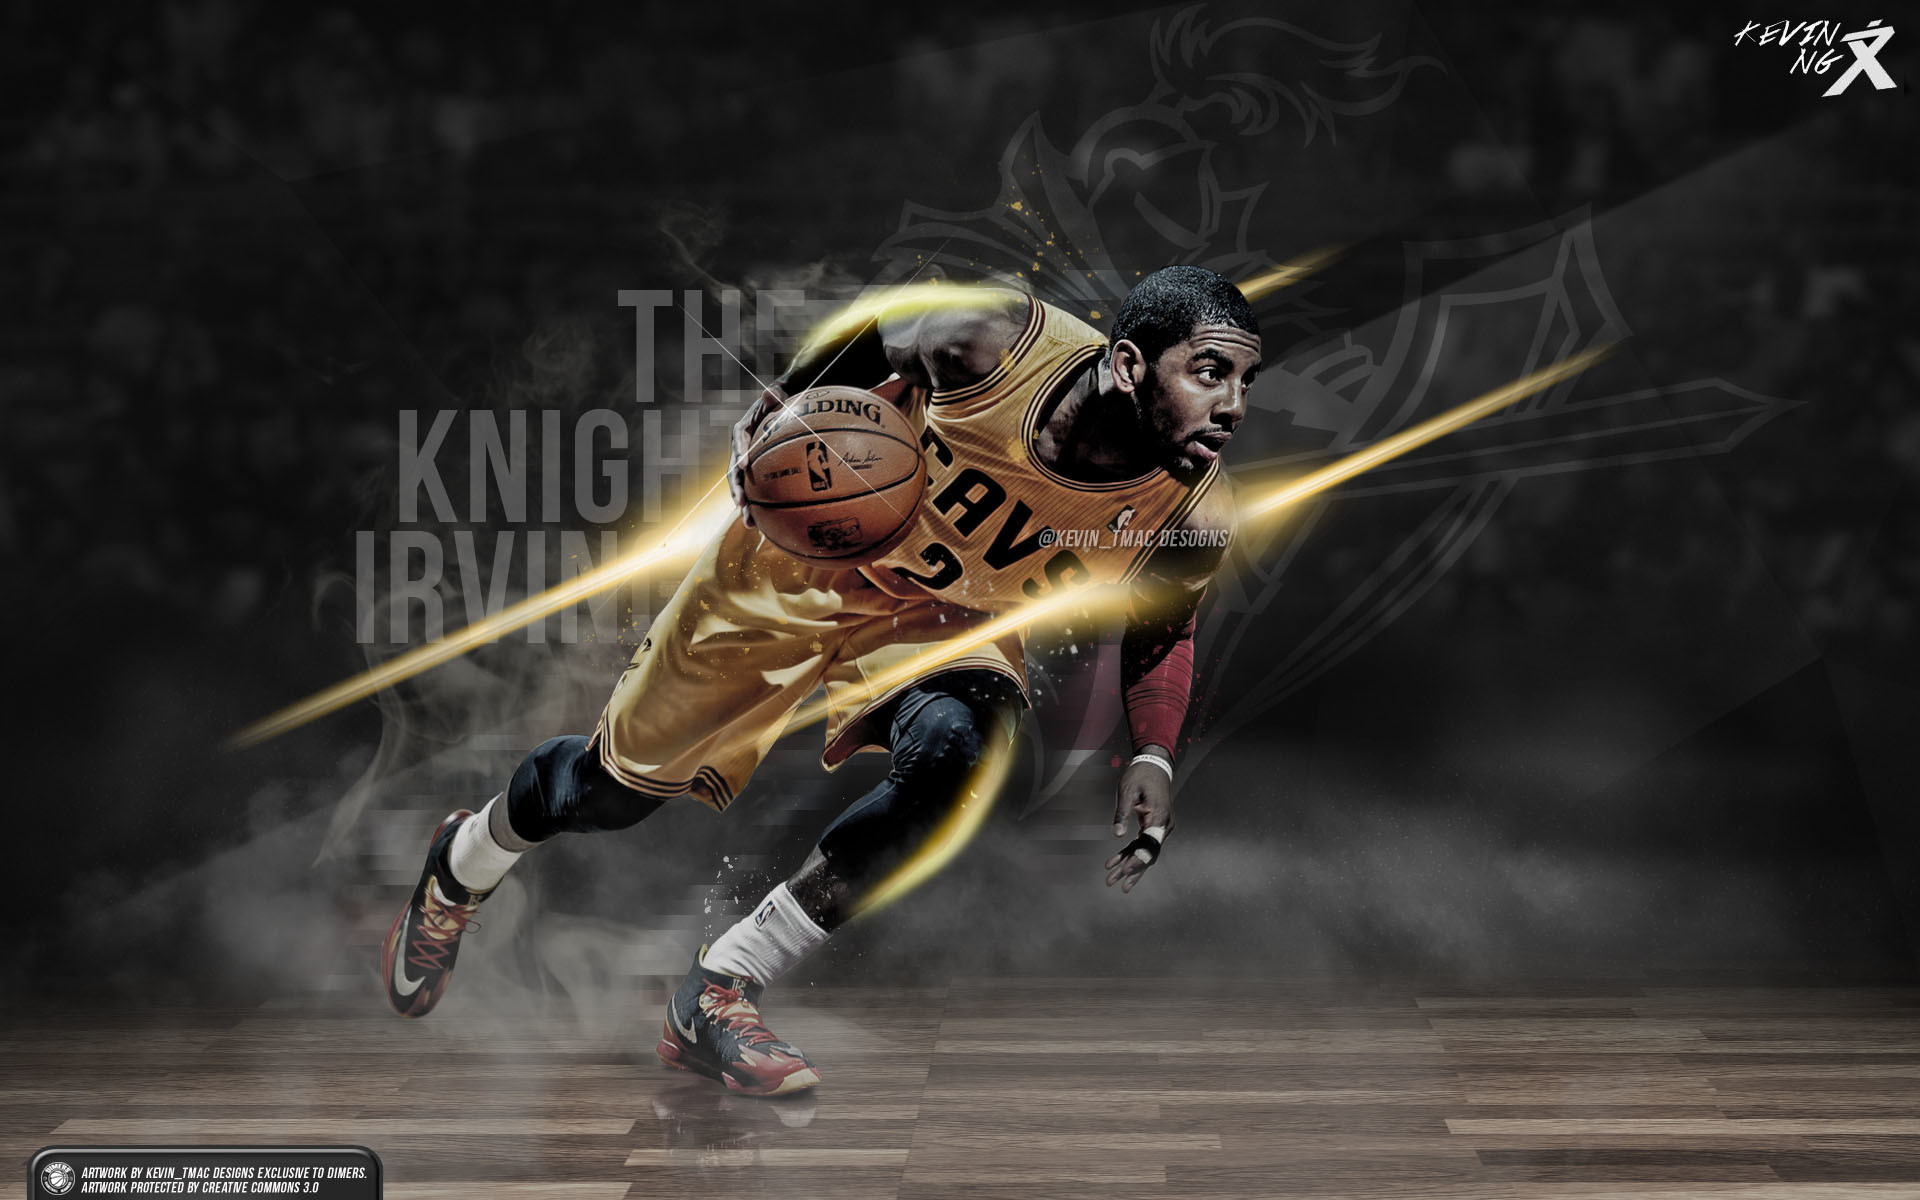 kyrie irving live wallpaper,fictional character,cg artwork,illustration,graphic design,pc game